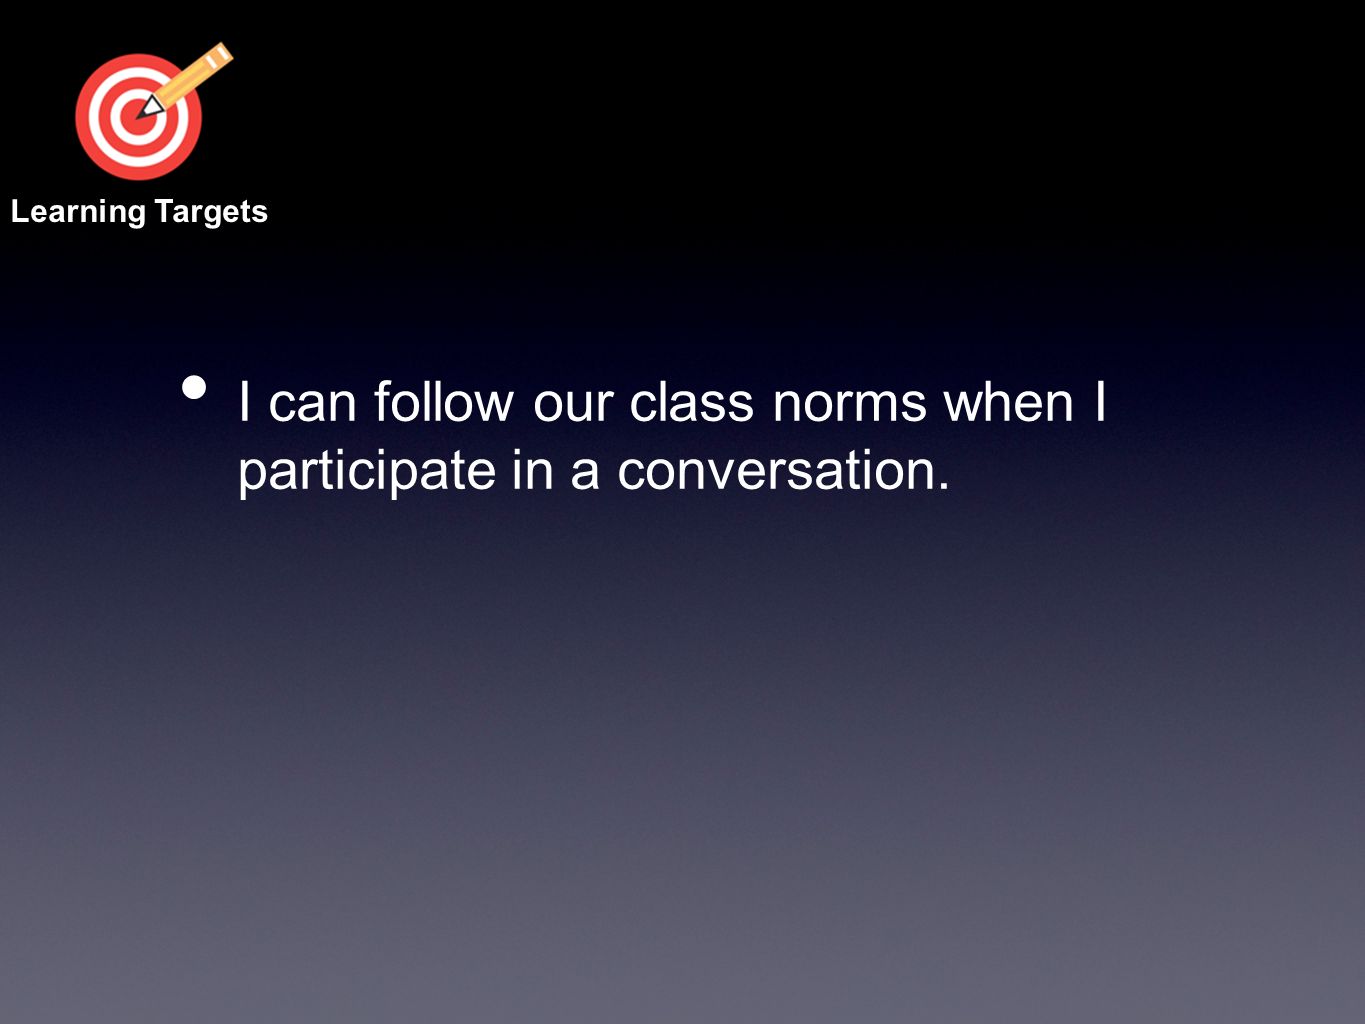 I can follow our class norms when I participate in a conversation.